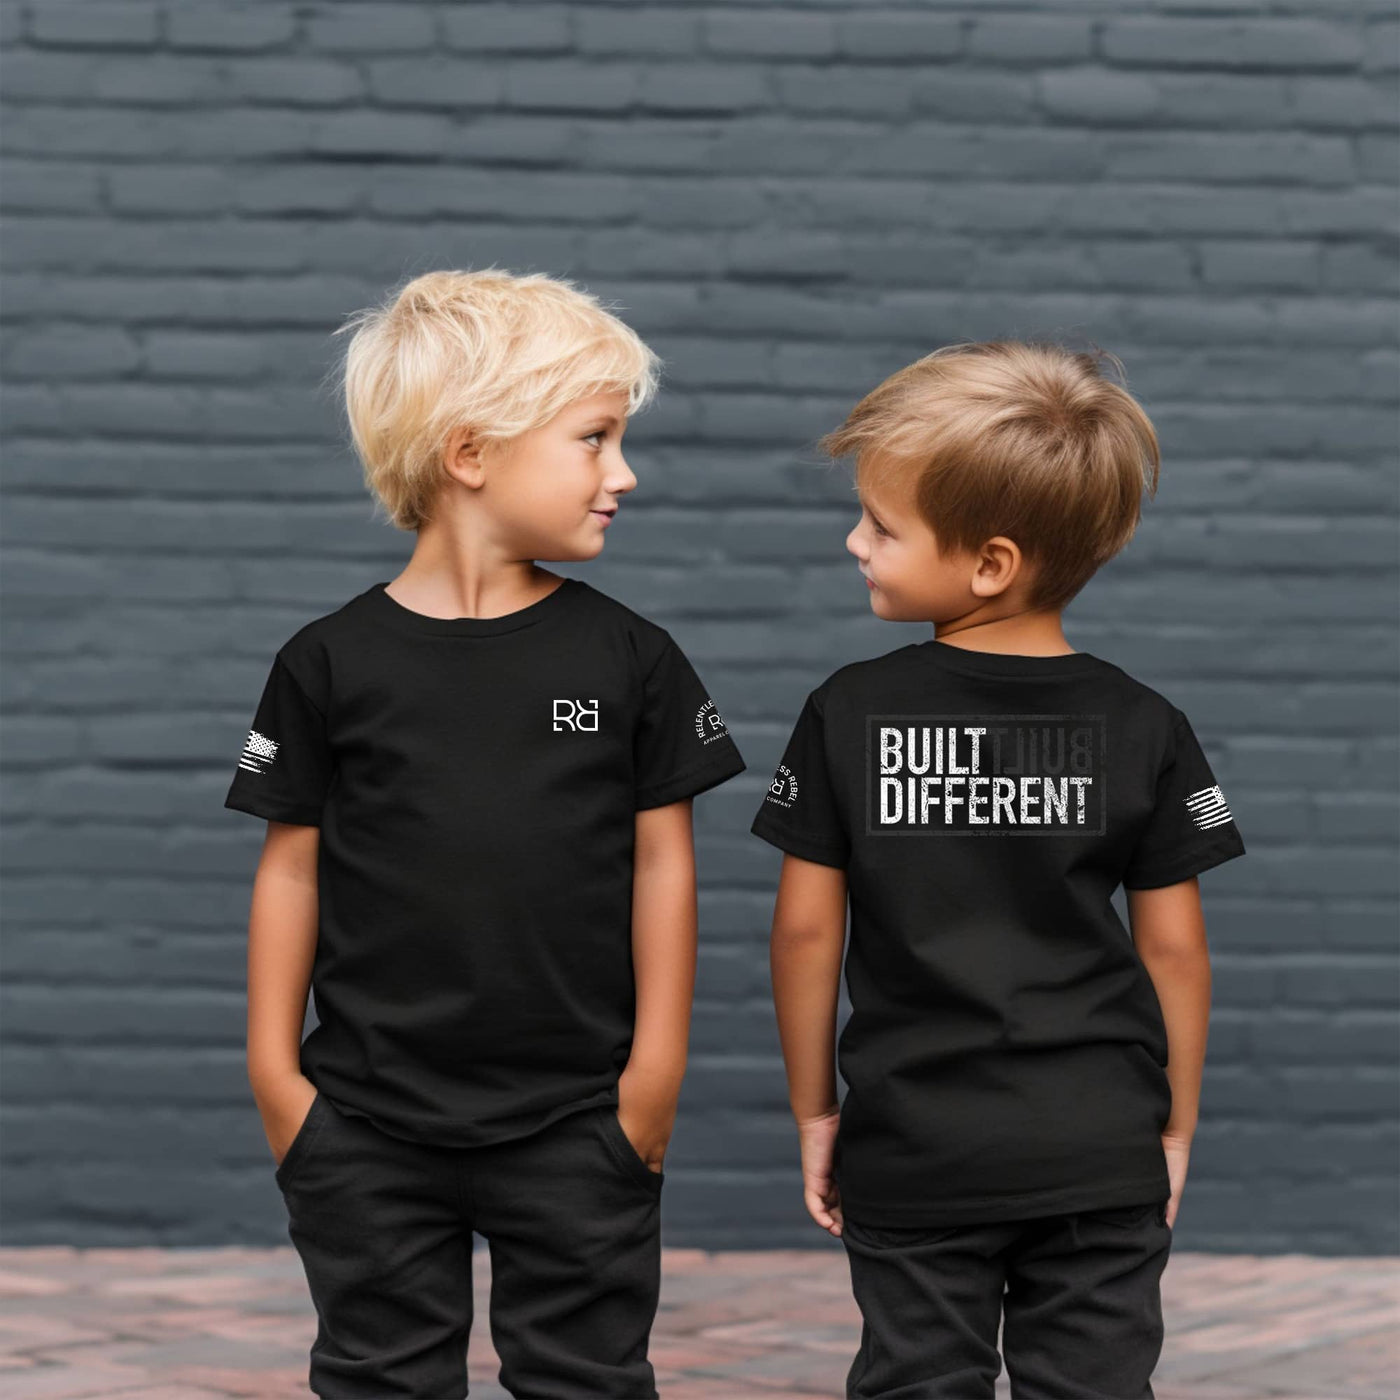 Boys wearing Solid Black Youth Built Different Back Design Tee